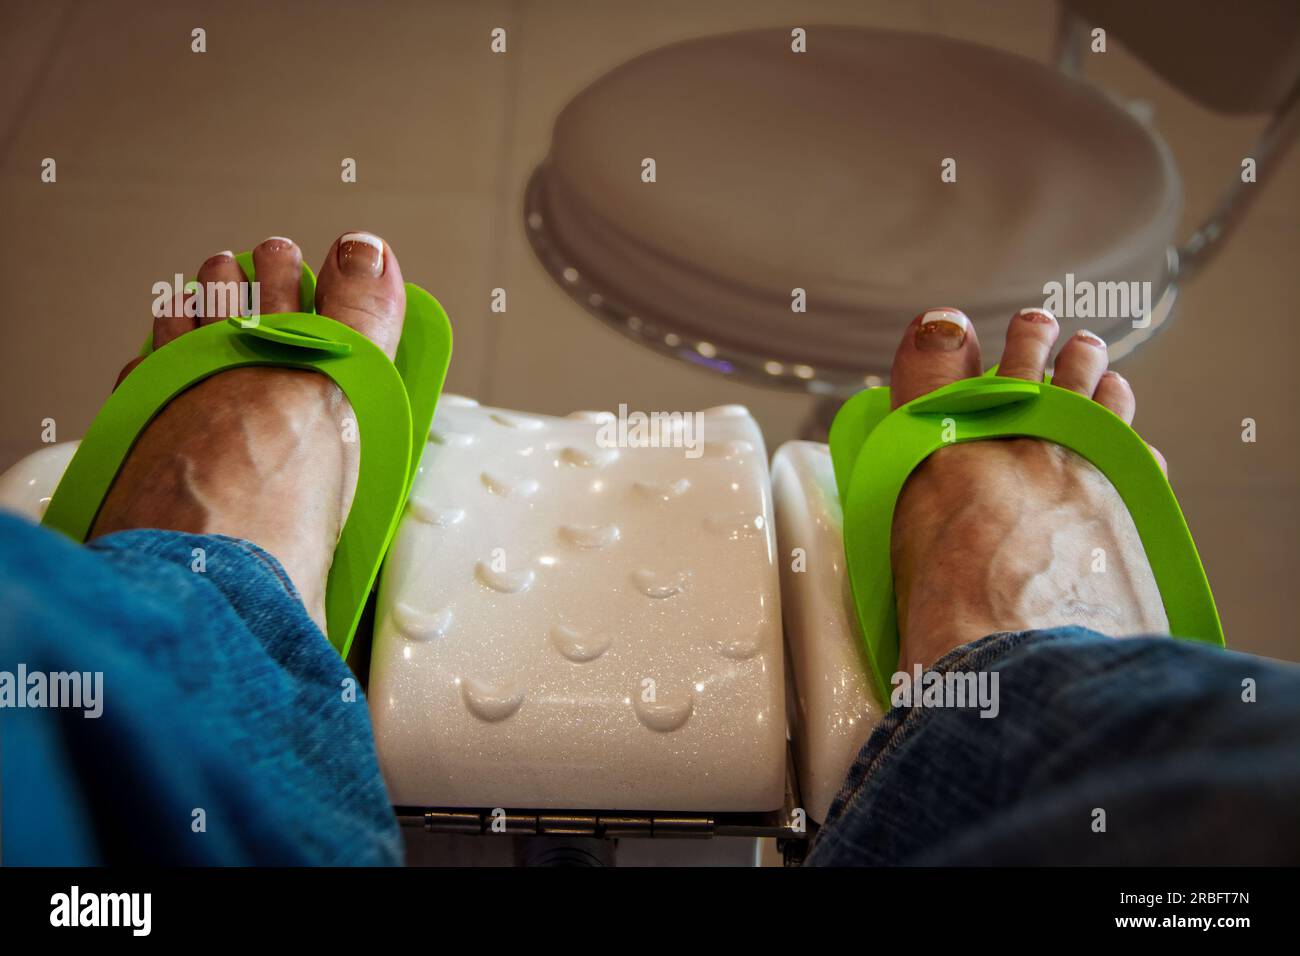 Feet of woman at nail salon who has just had her toes done in the French style and is waiting for them to dry with lime green temporary foam sandals o Stock Photo